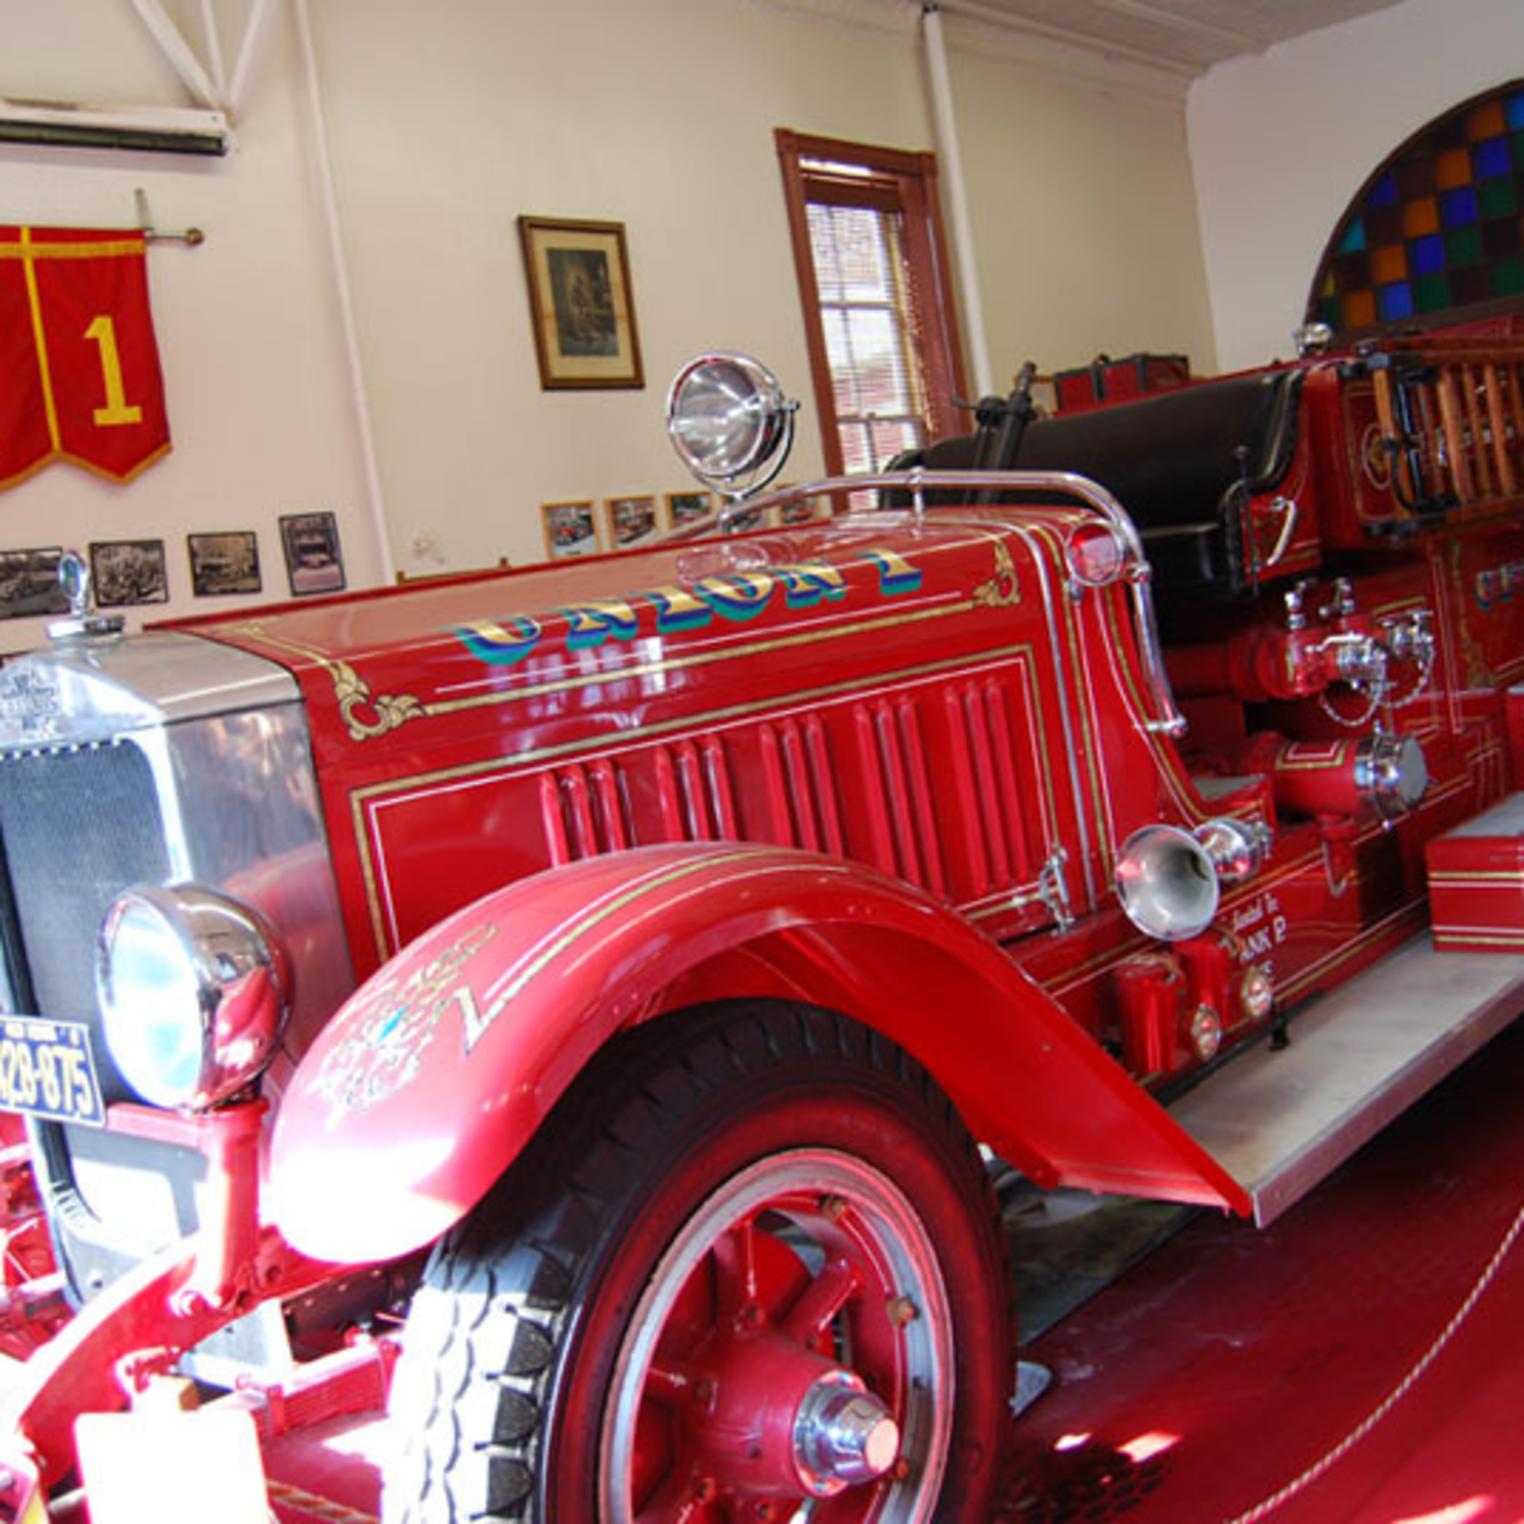 Firetruck at the Union Fire Company No. 1 Museum